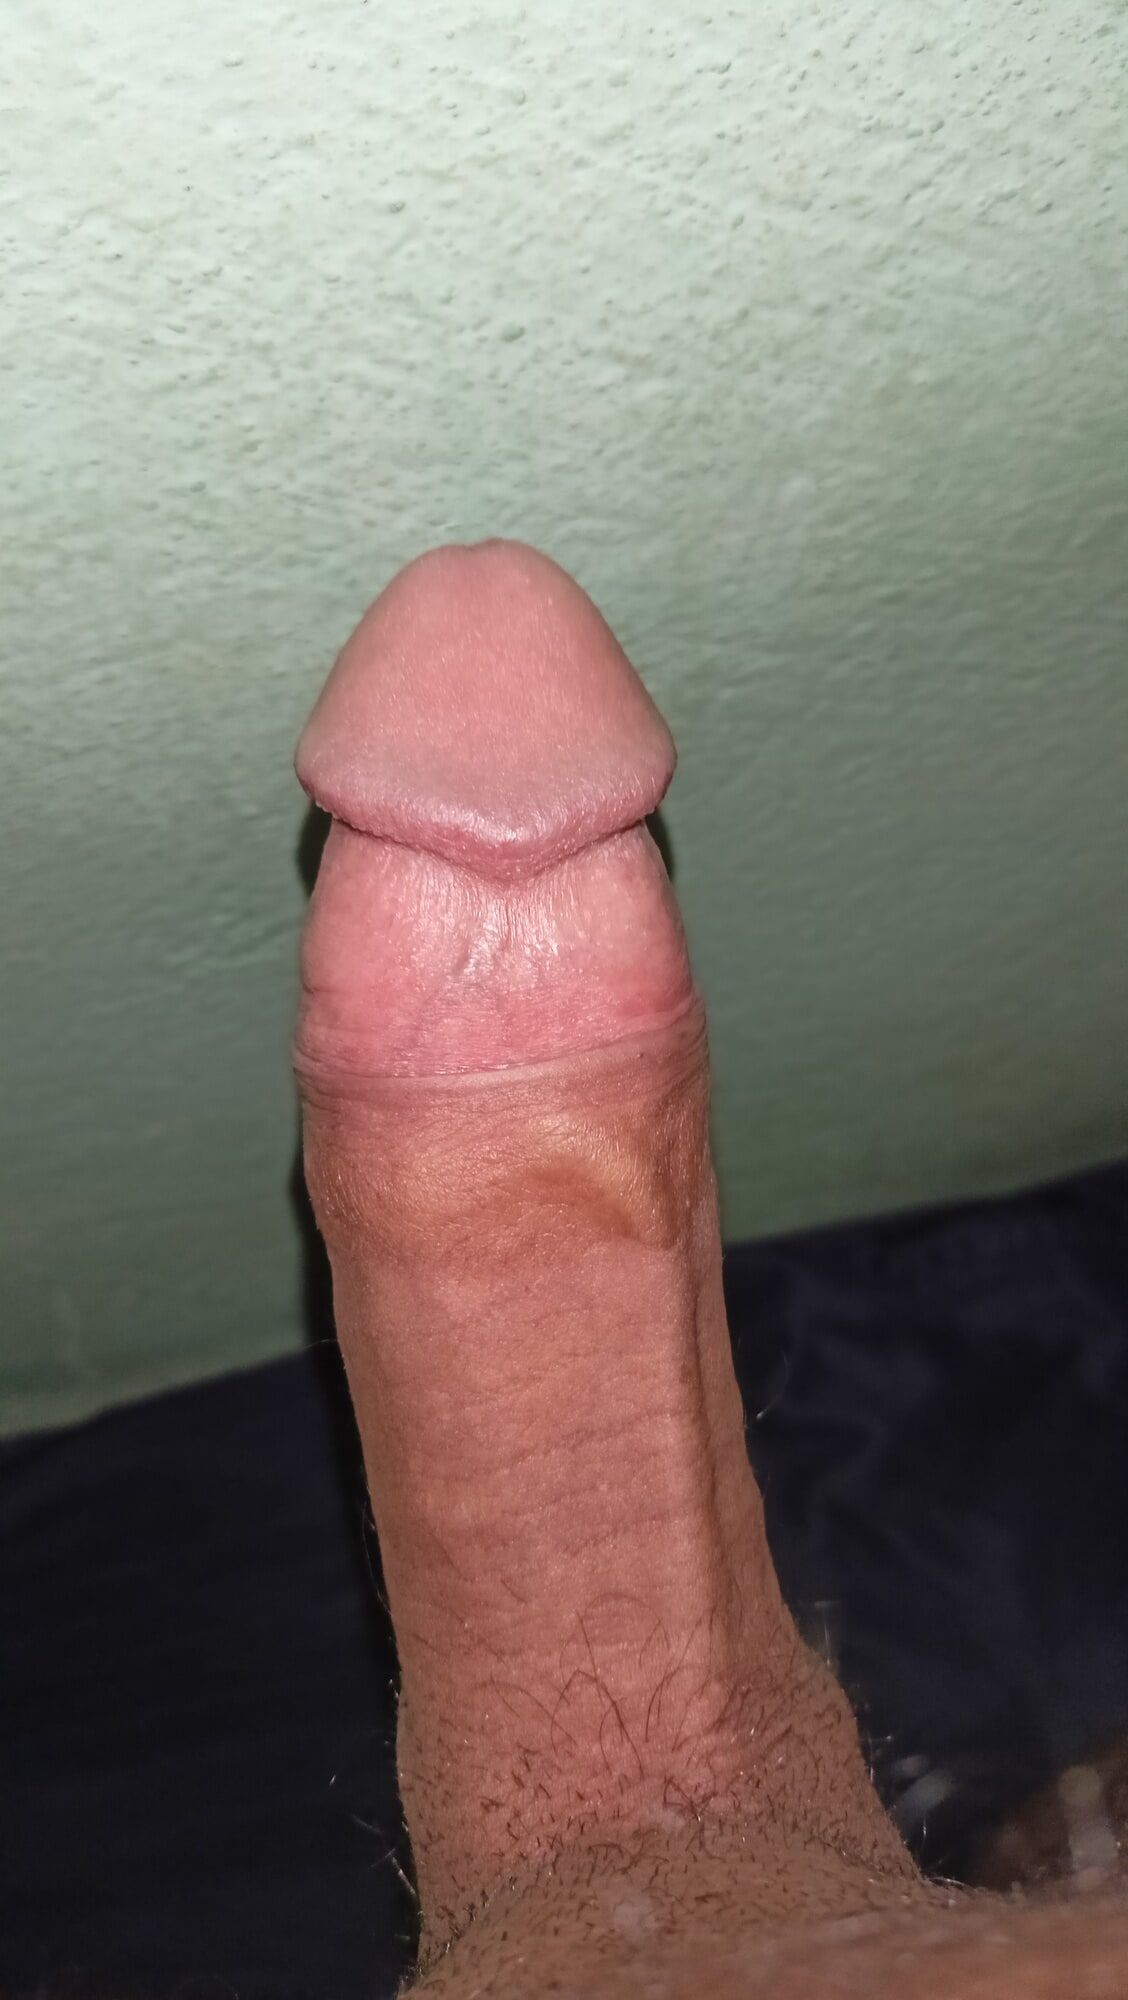 Opinions on my 5.7 inch cock!? #2